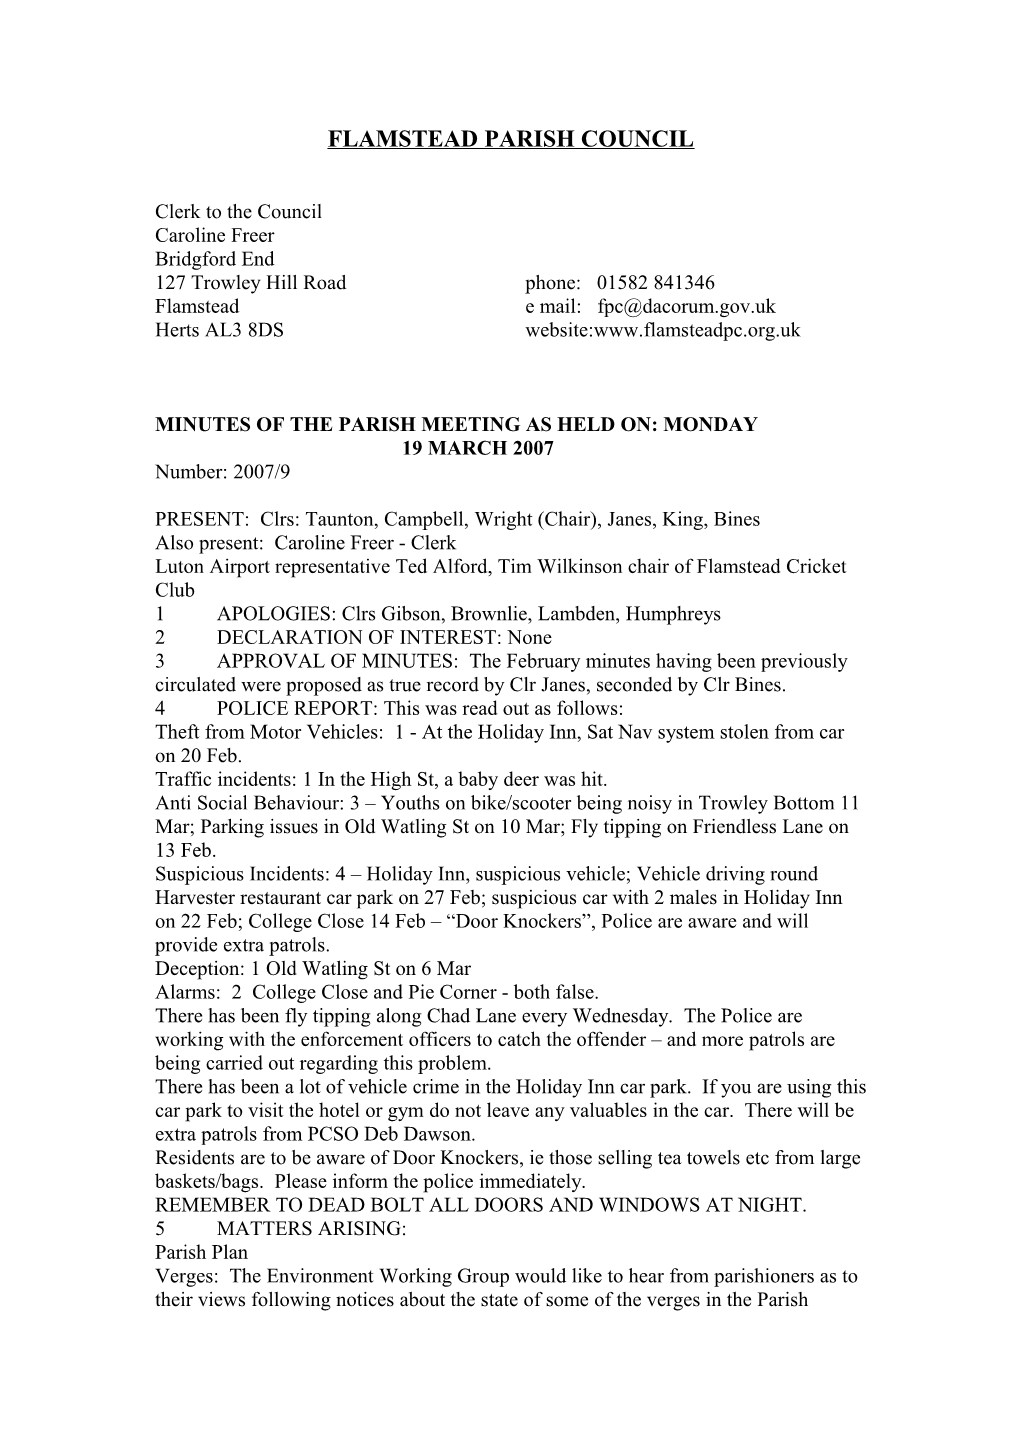 Clerk to Flamstead Parish Council